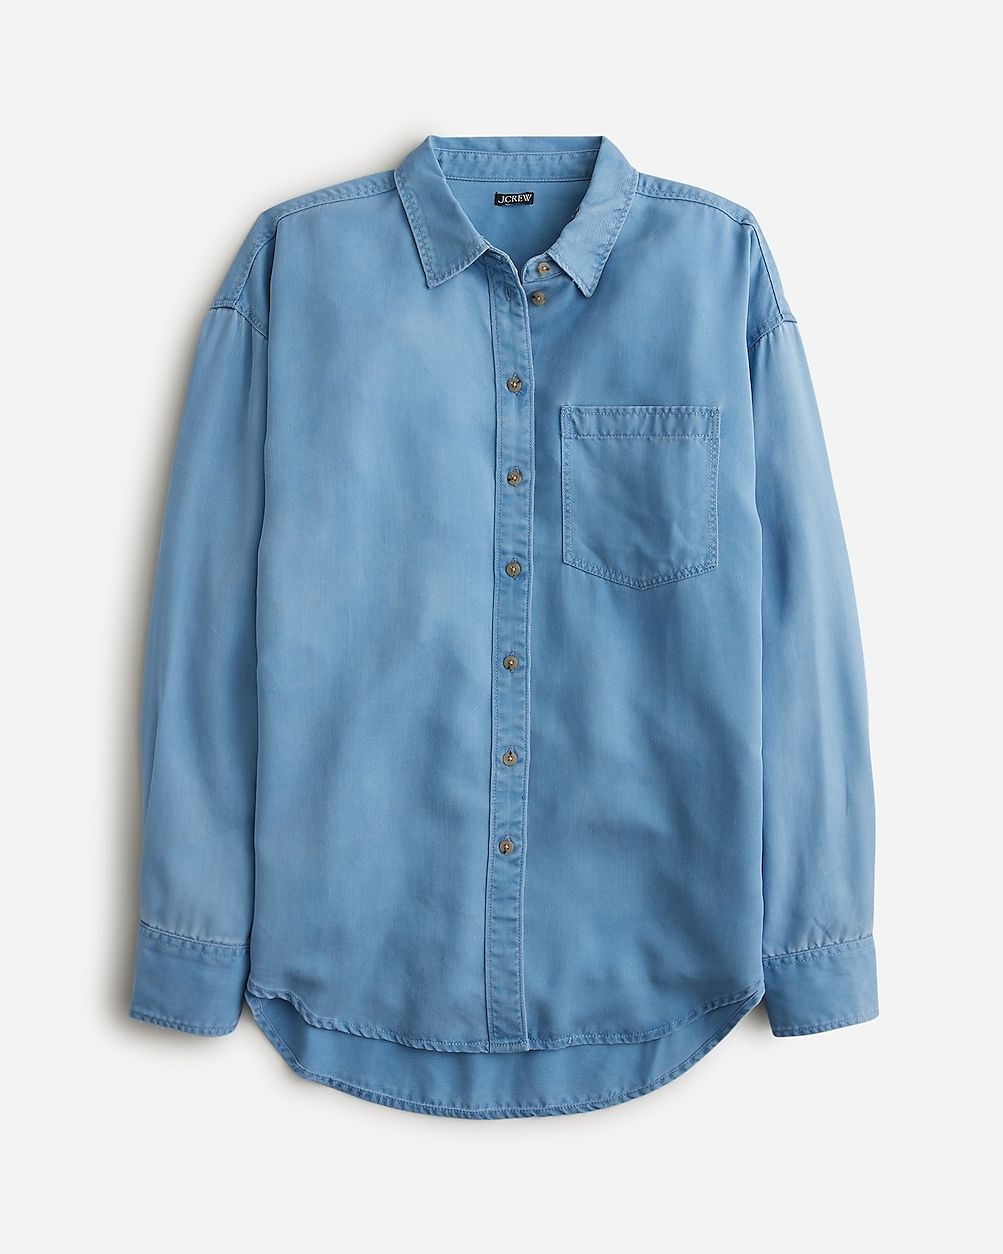 Etienne oversized shirt in chambray twill | J.Crew US